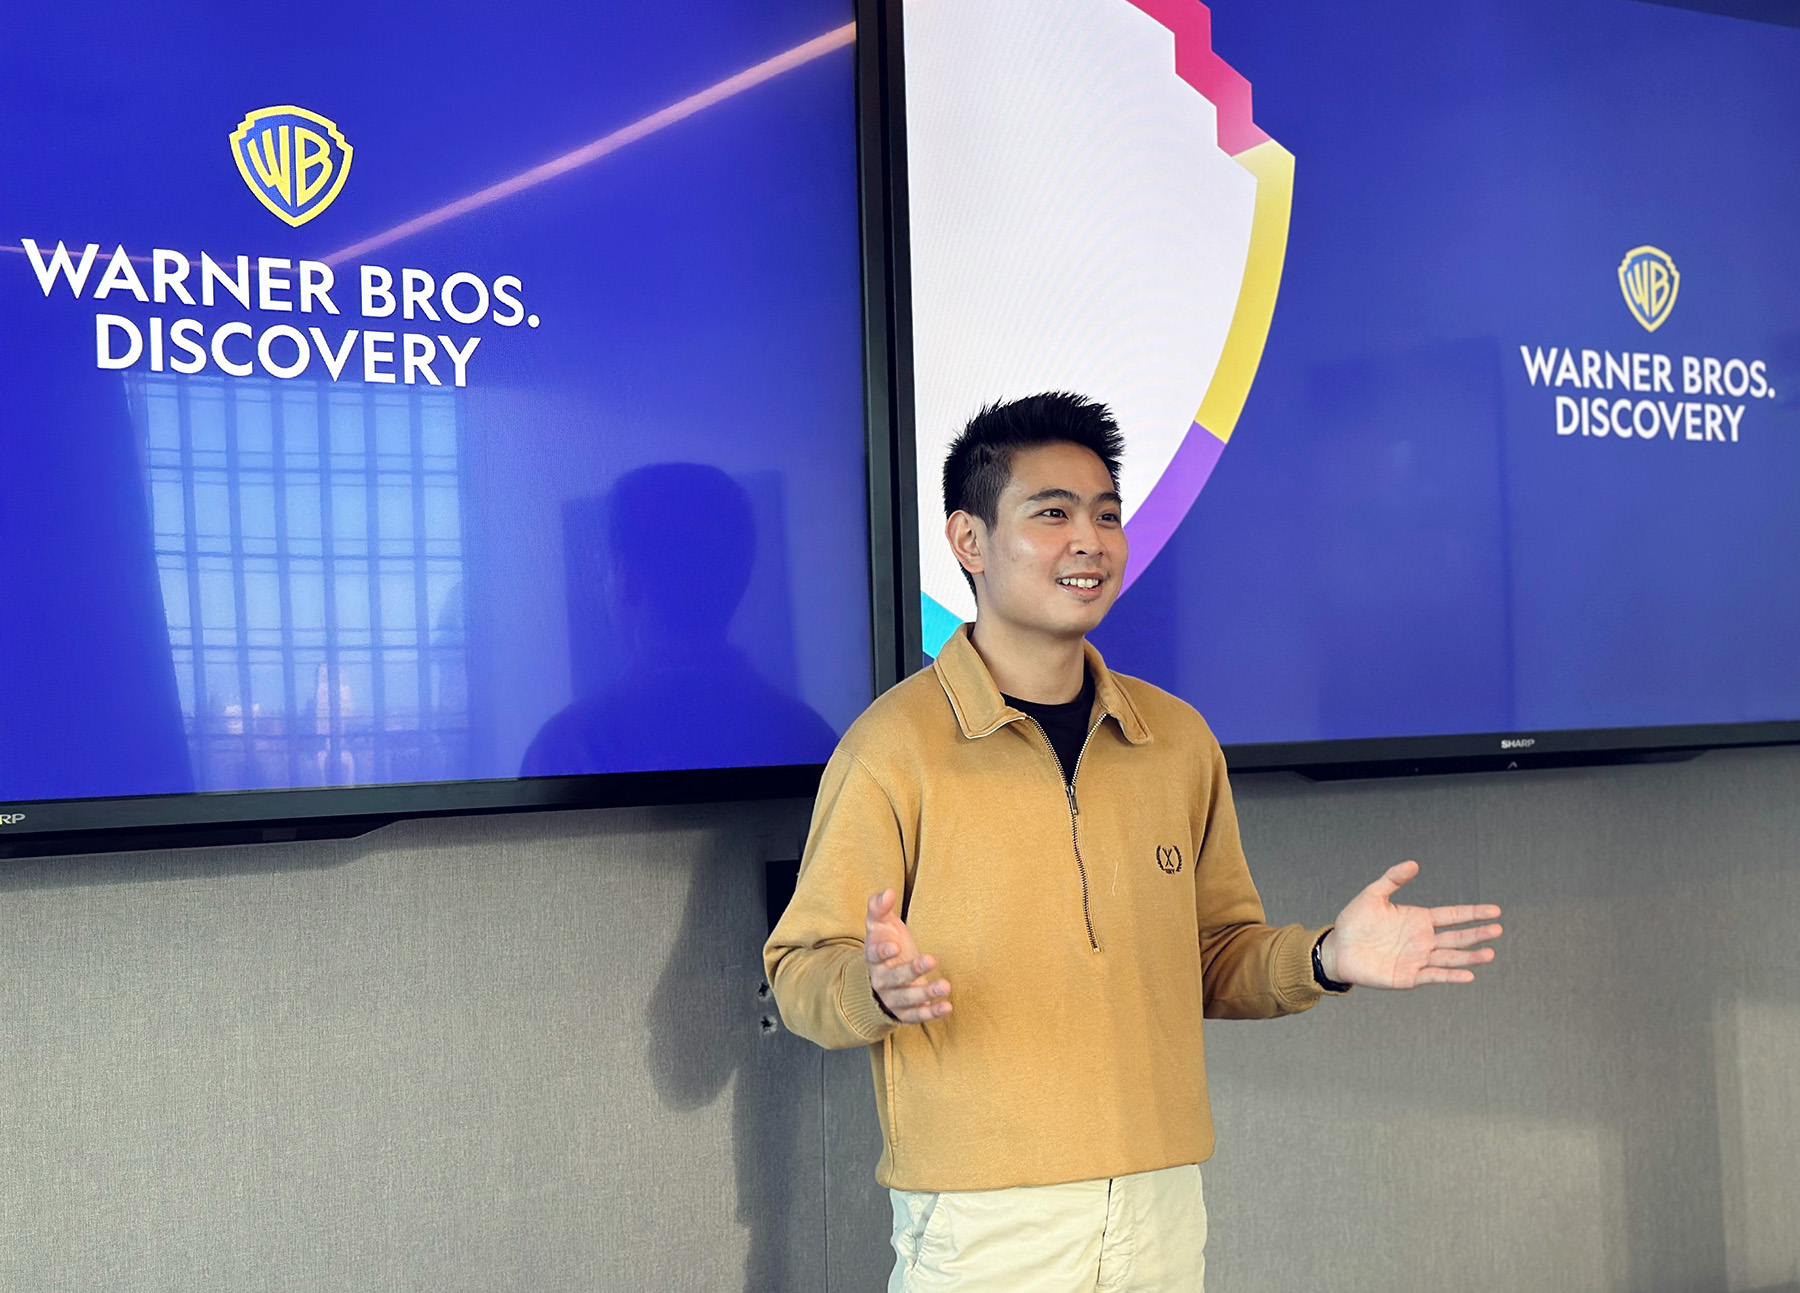 Person standing at the front of a room speaking with display screens in the background that reads, "Warner Brothers Discovery".